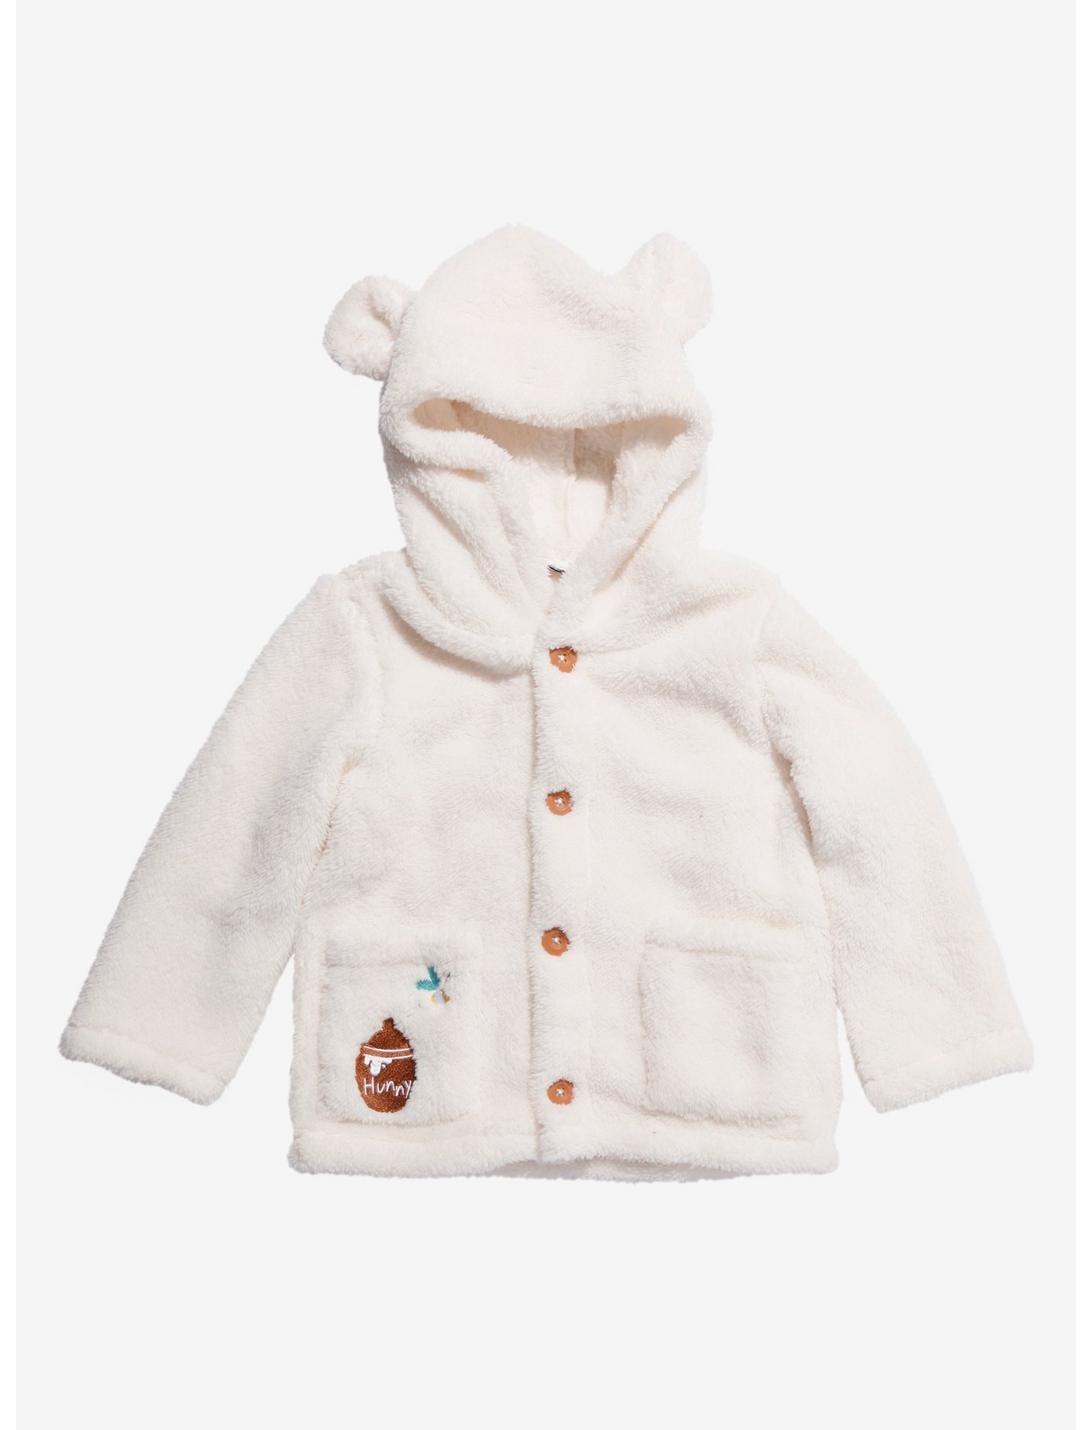 Disney Winnie The Pooh Ear Toddler Cardigan - BoxLunch Exclusive, NATURAL, hi-res